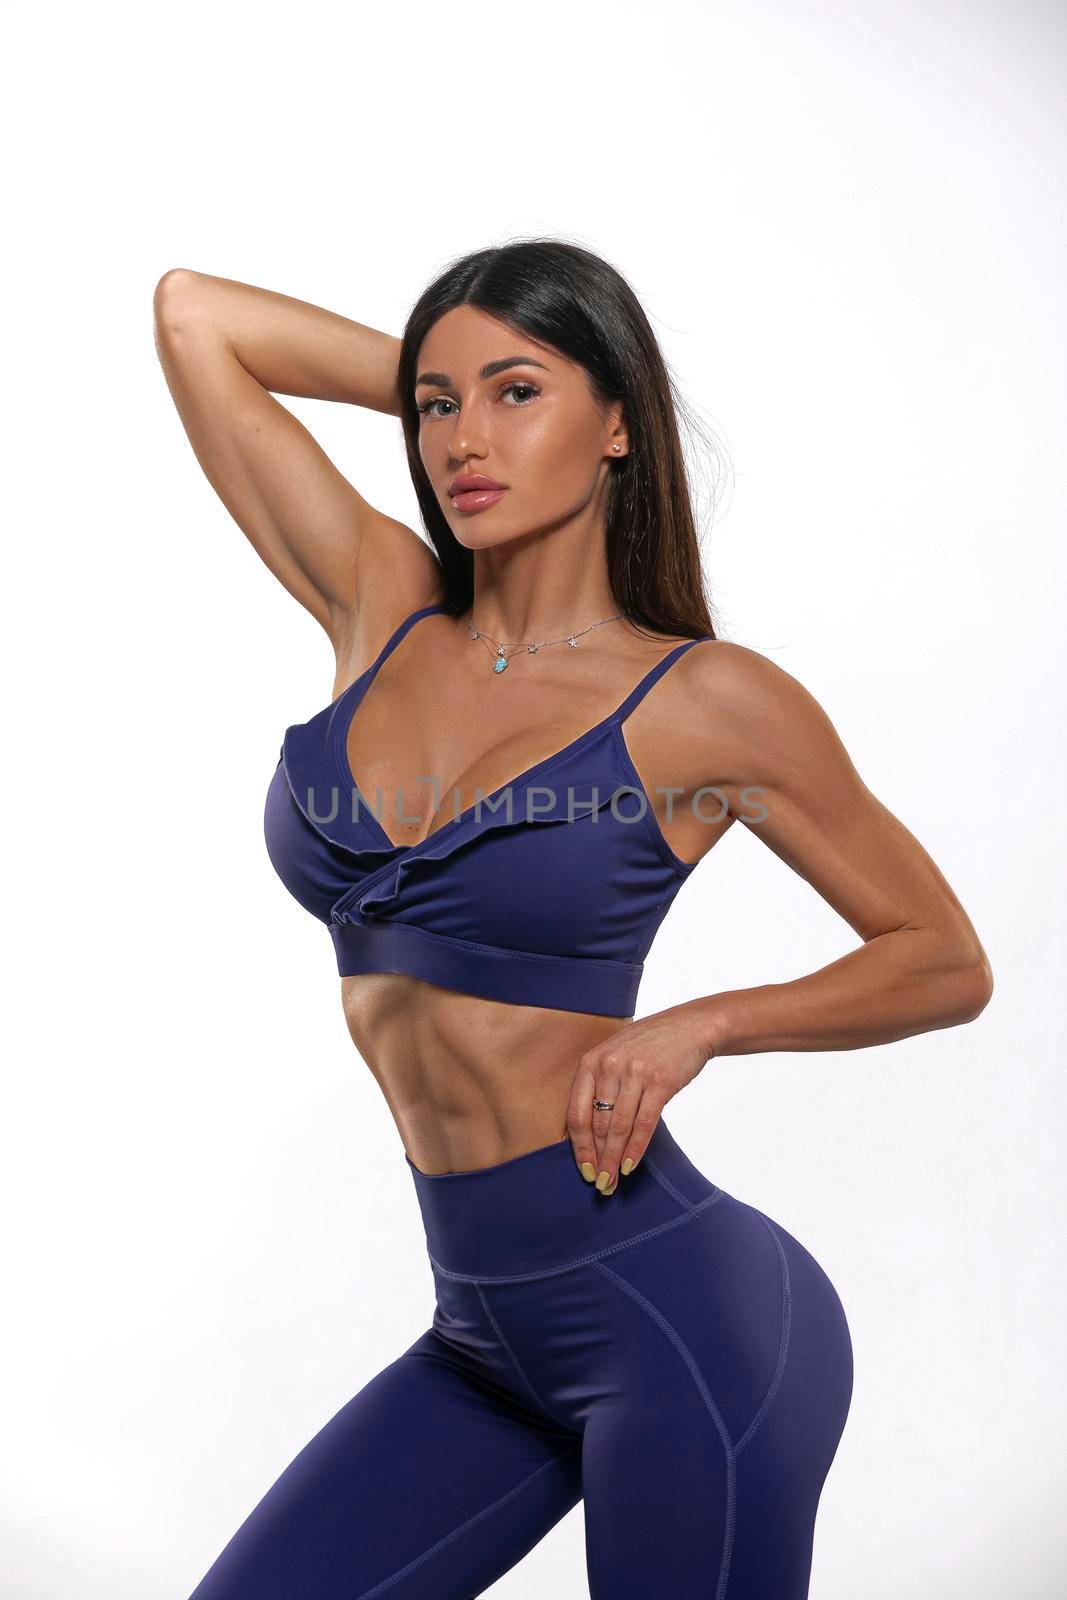 brunet girl in blue leggings and top on a white background